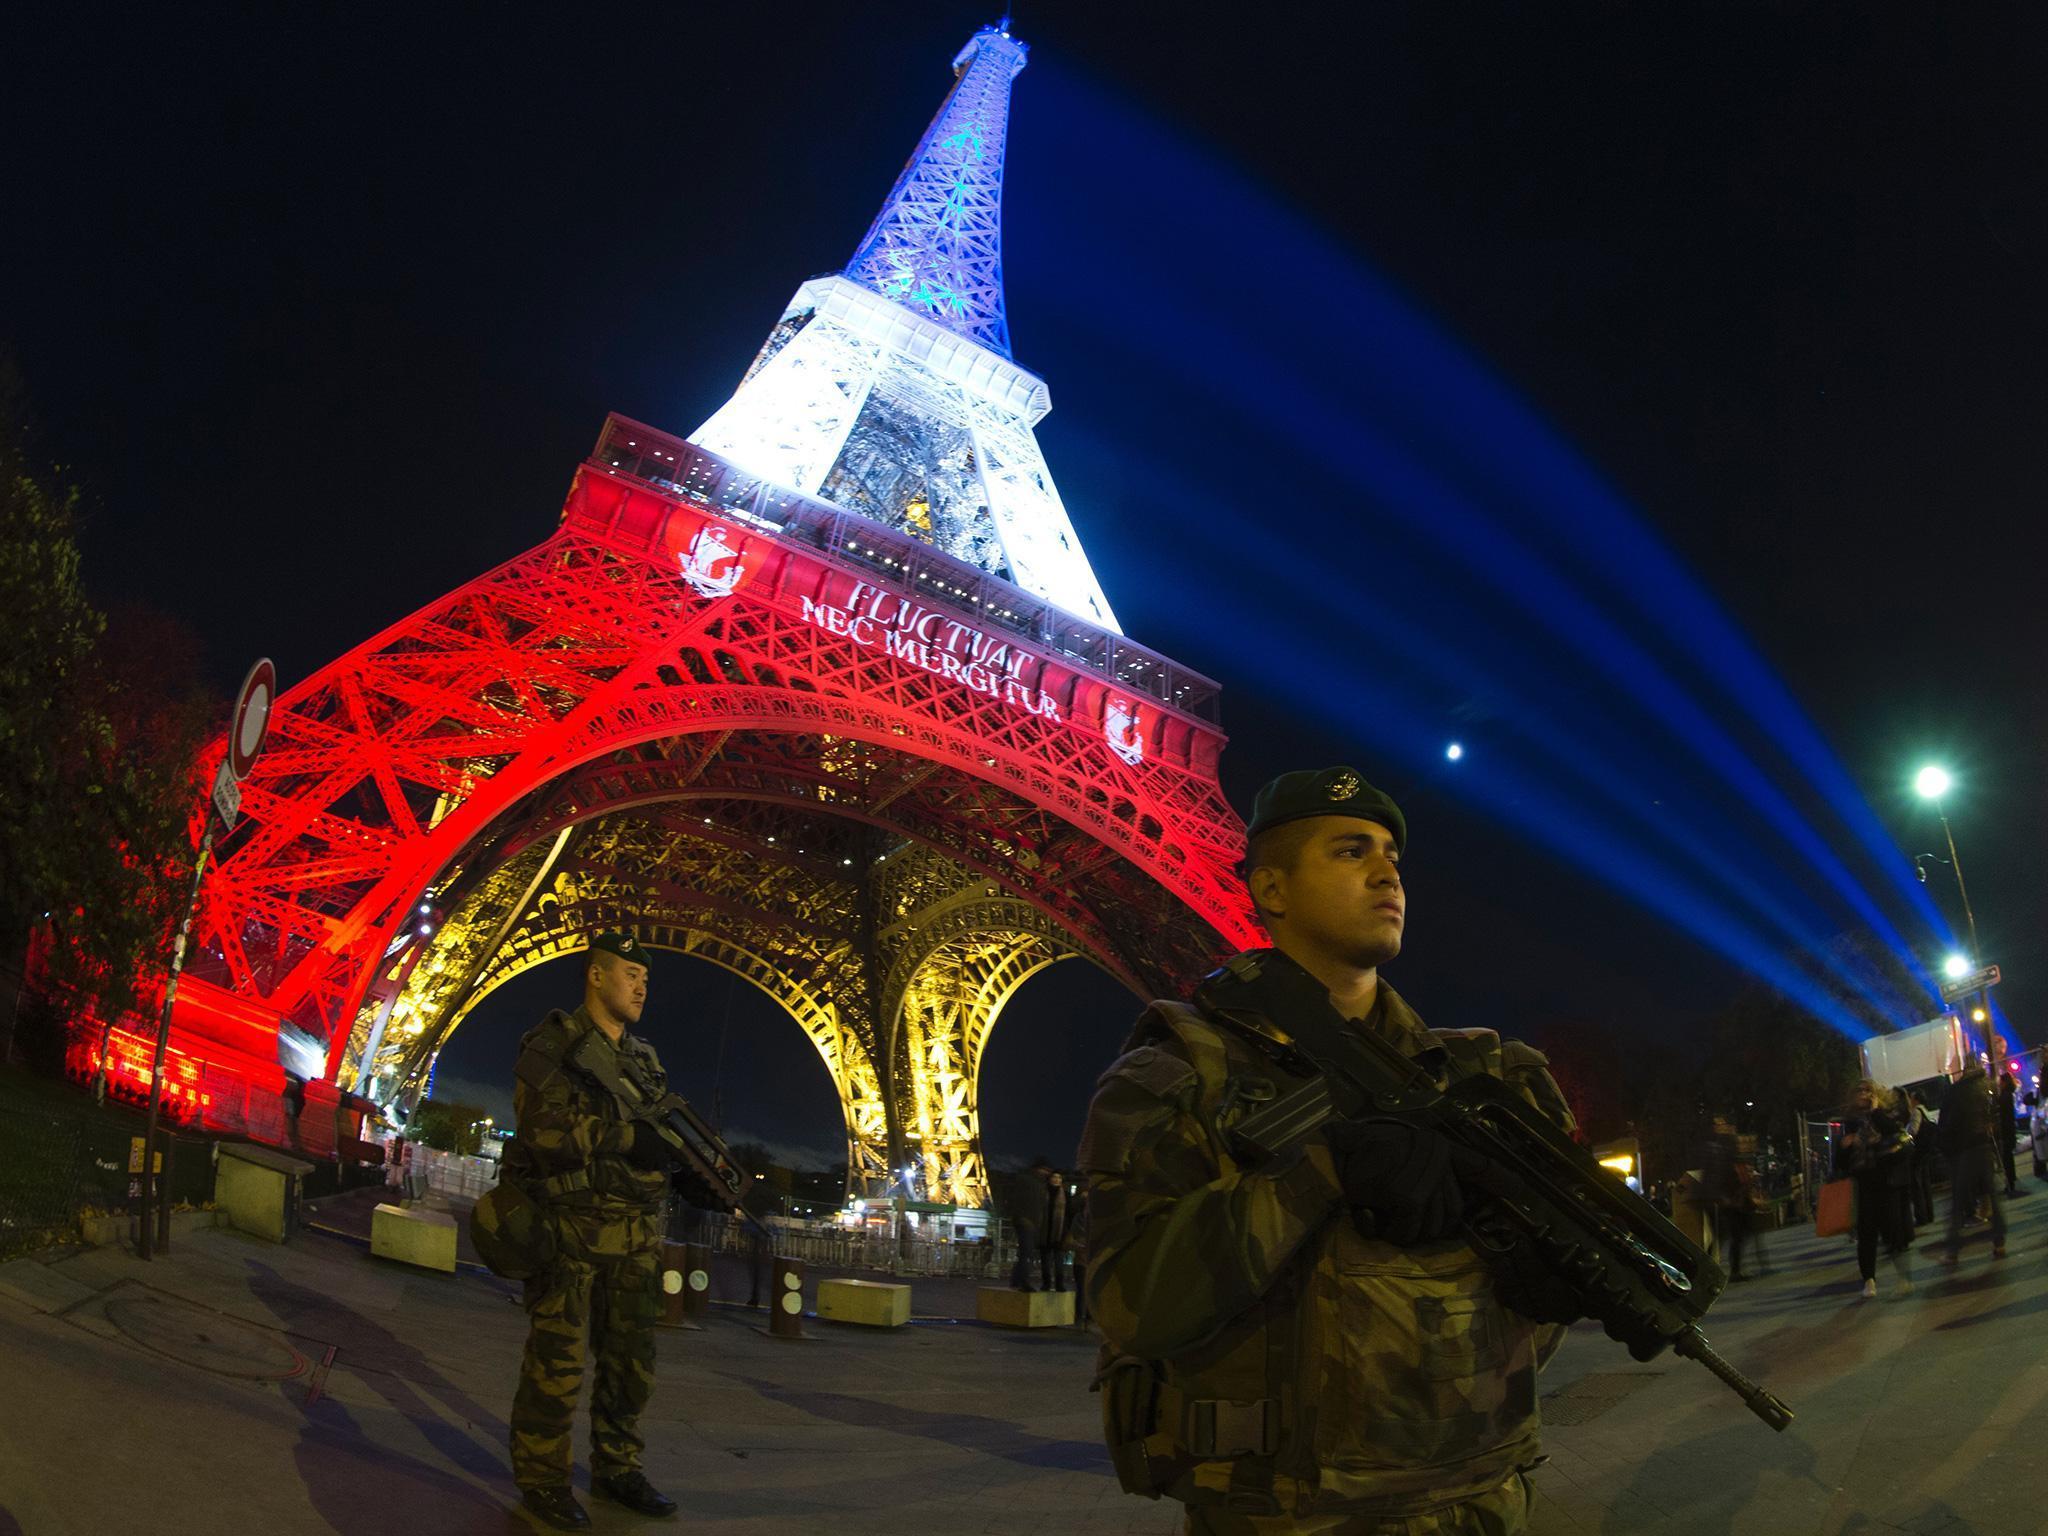 Paris loses £644m as tourists steer clear of the city after terror